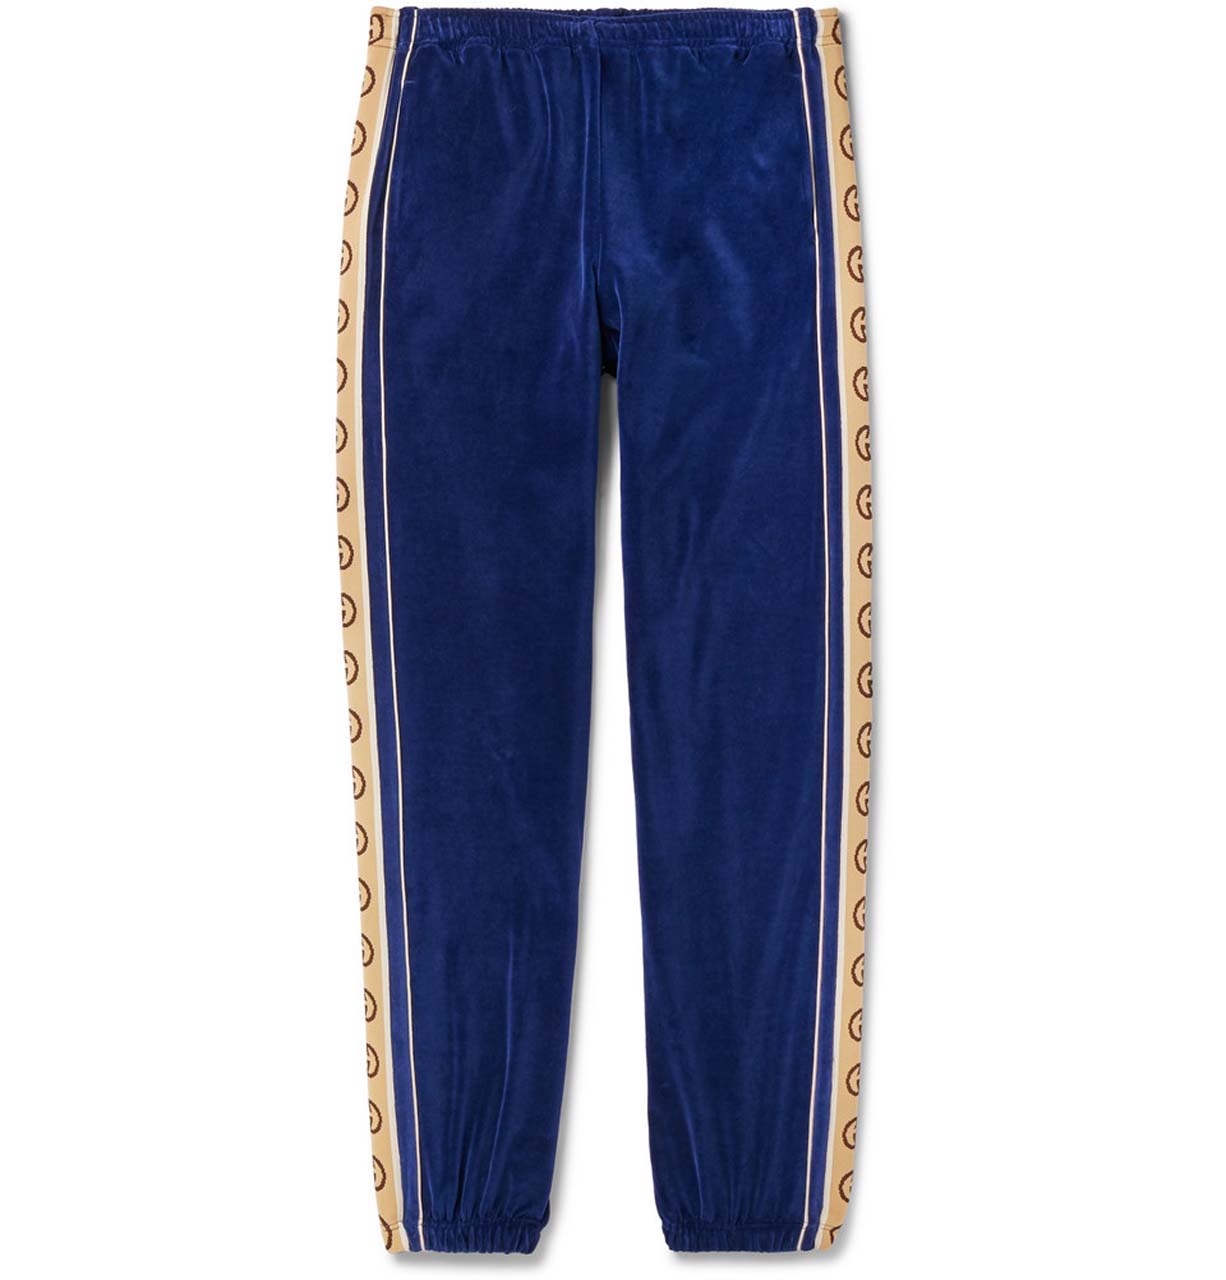 Gucci Tapered Logo-Appliquéd Webbing-Trimmed Piped Velvet Sweatpants